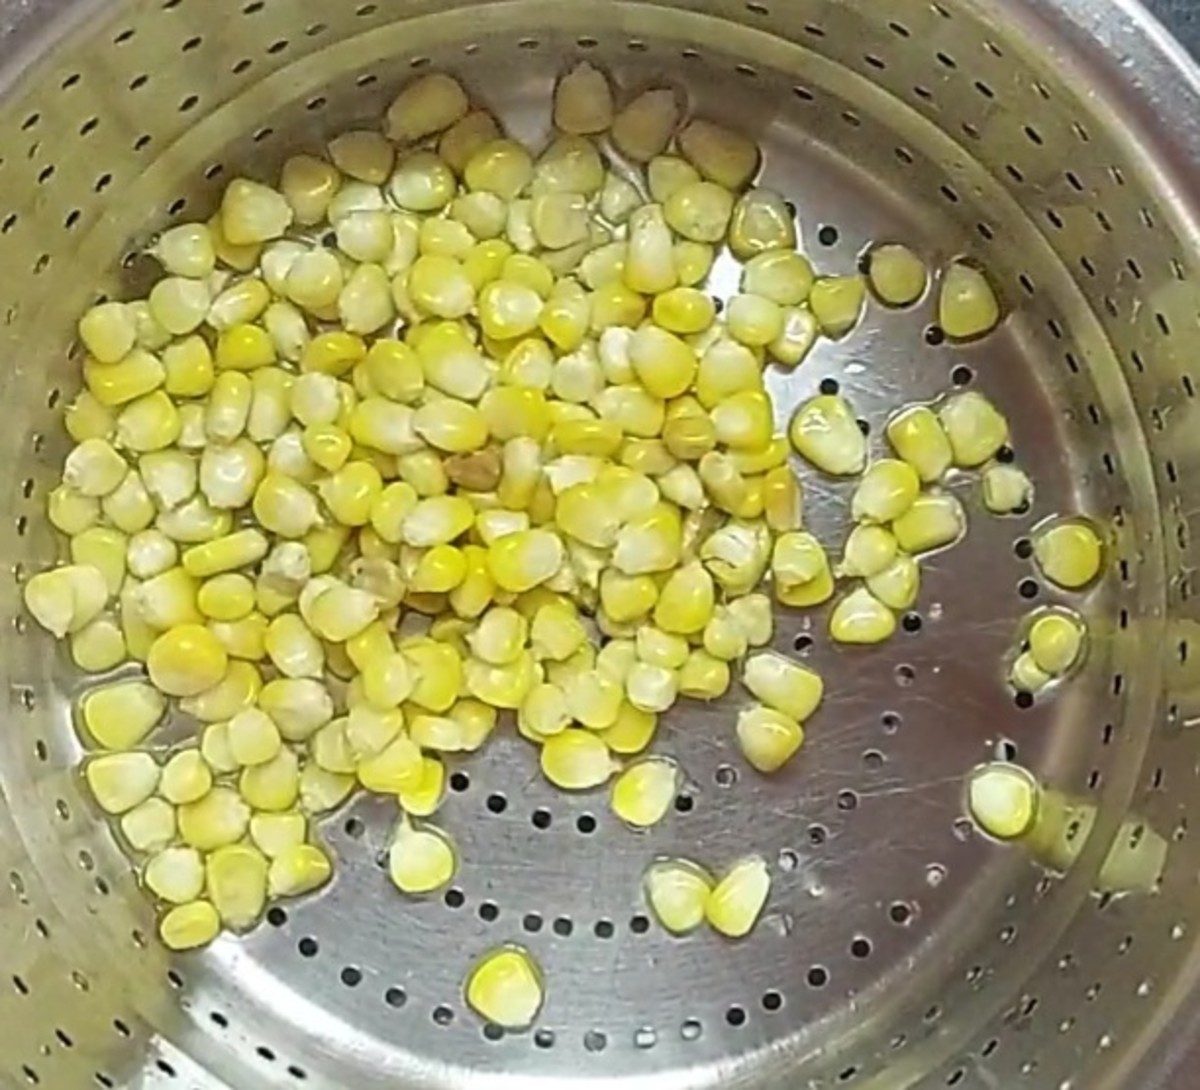 Once the sweet corn is cooked well, drain the water and set the corn aside.